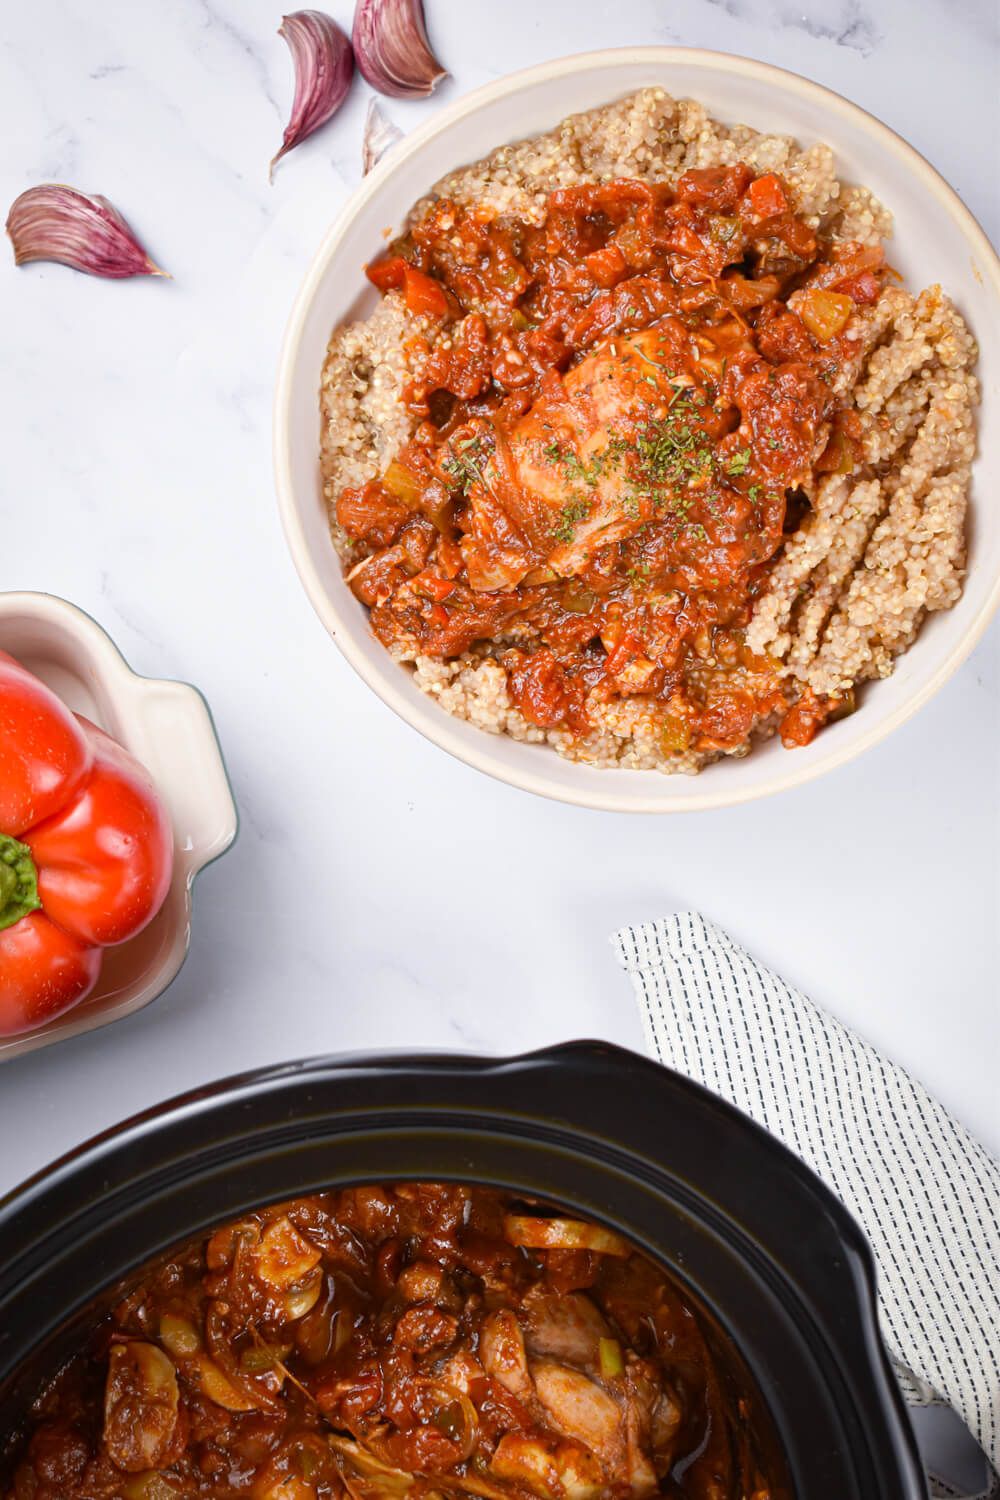 Crockpot chicken cacciatore in a bowl with quinoa and a crockpot with chicken in tomato sauce.